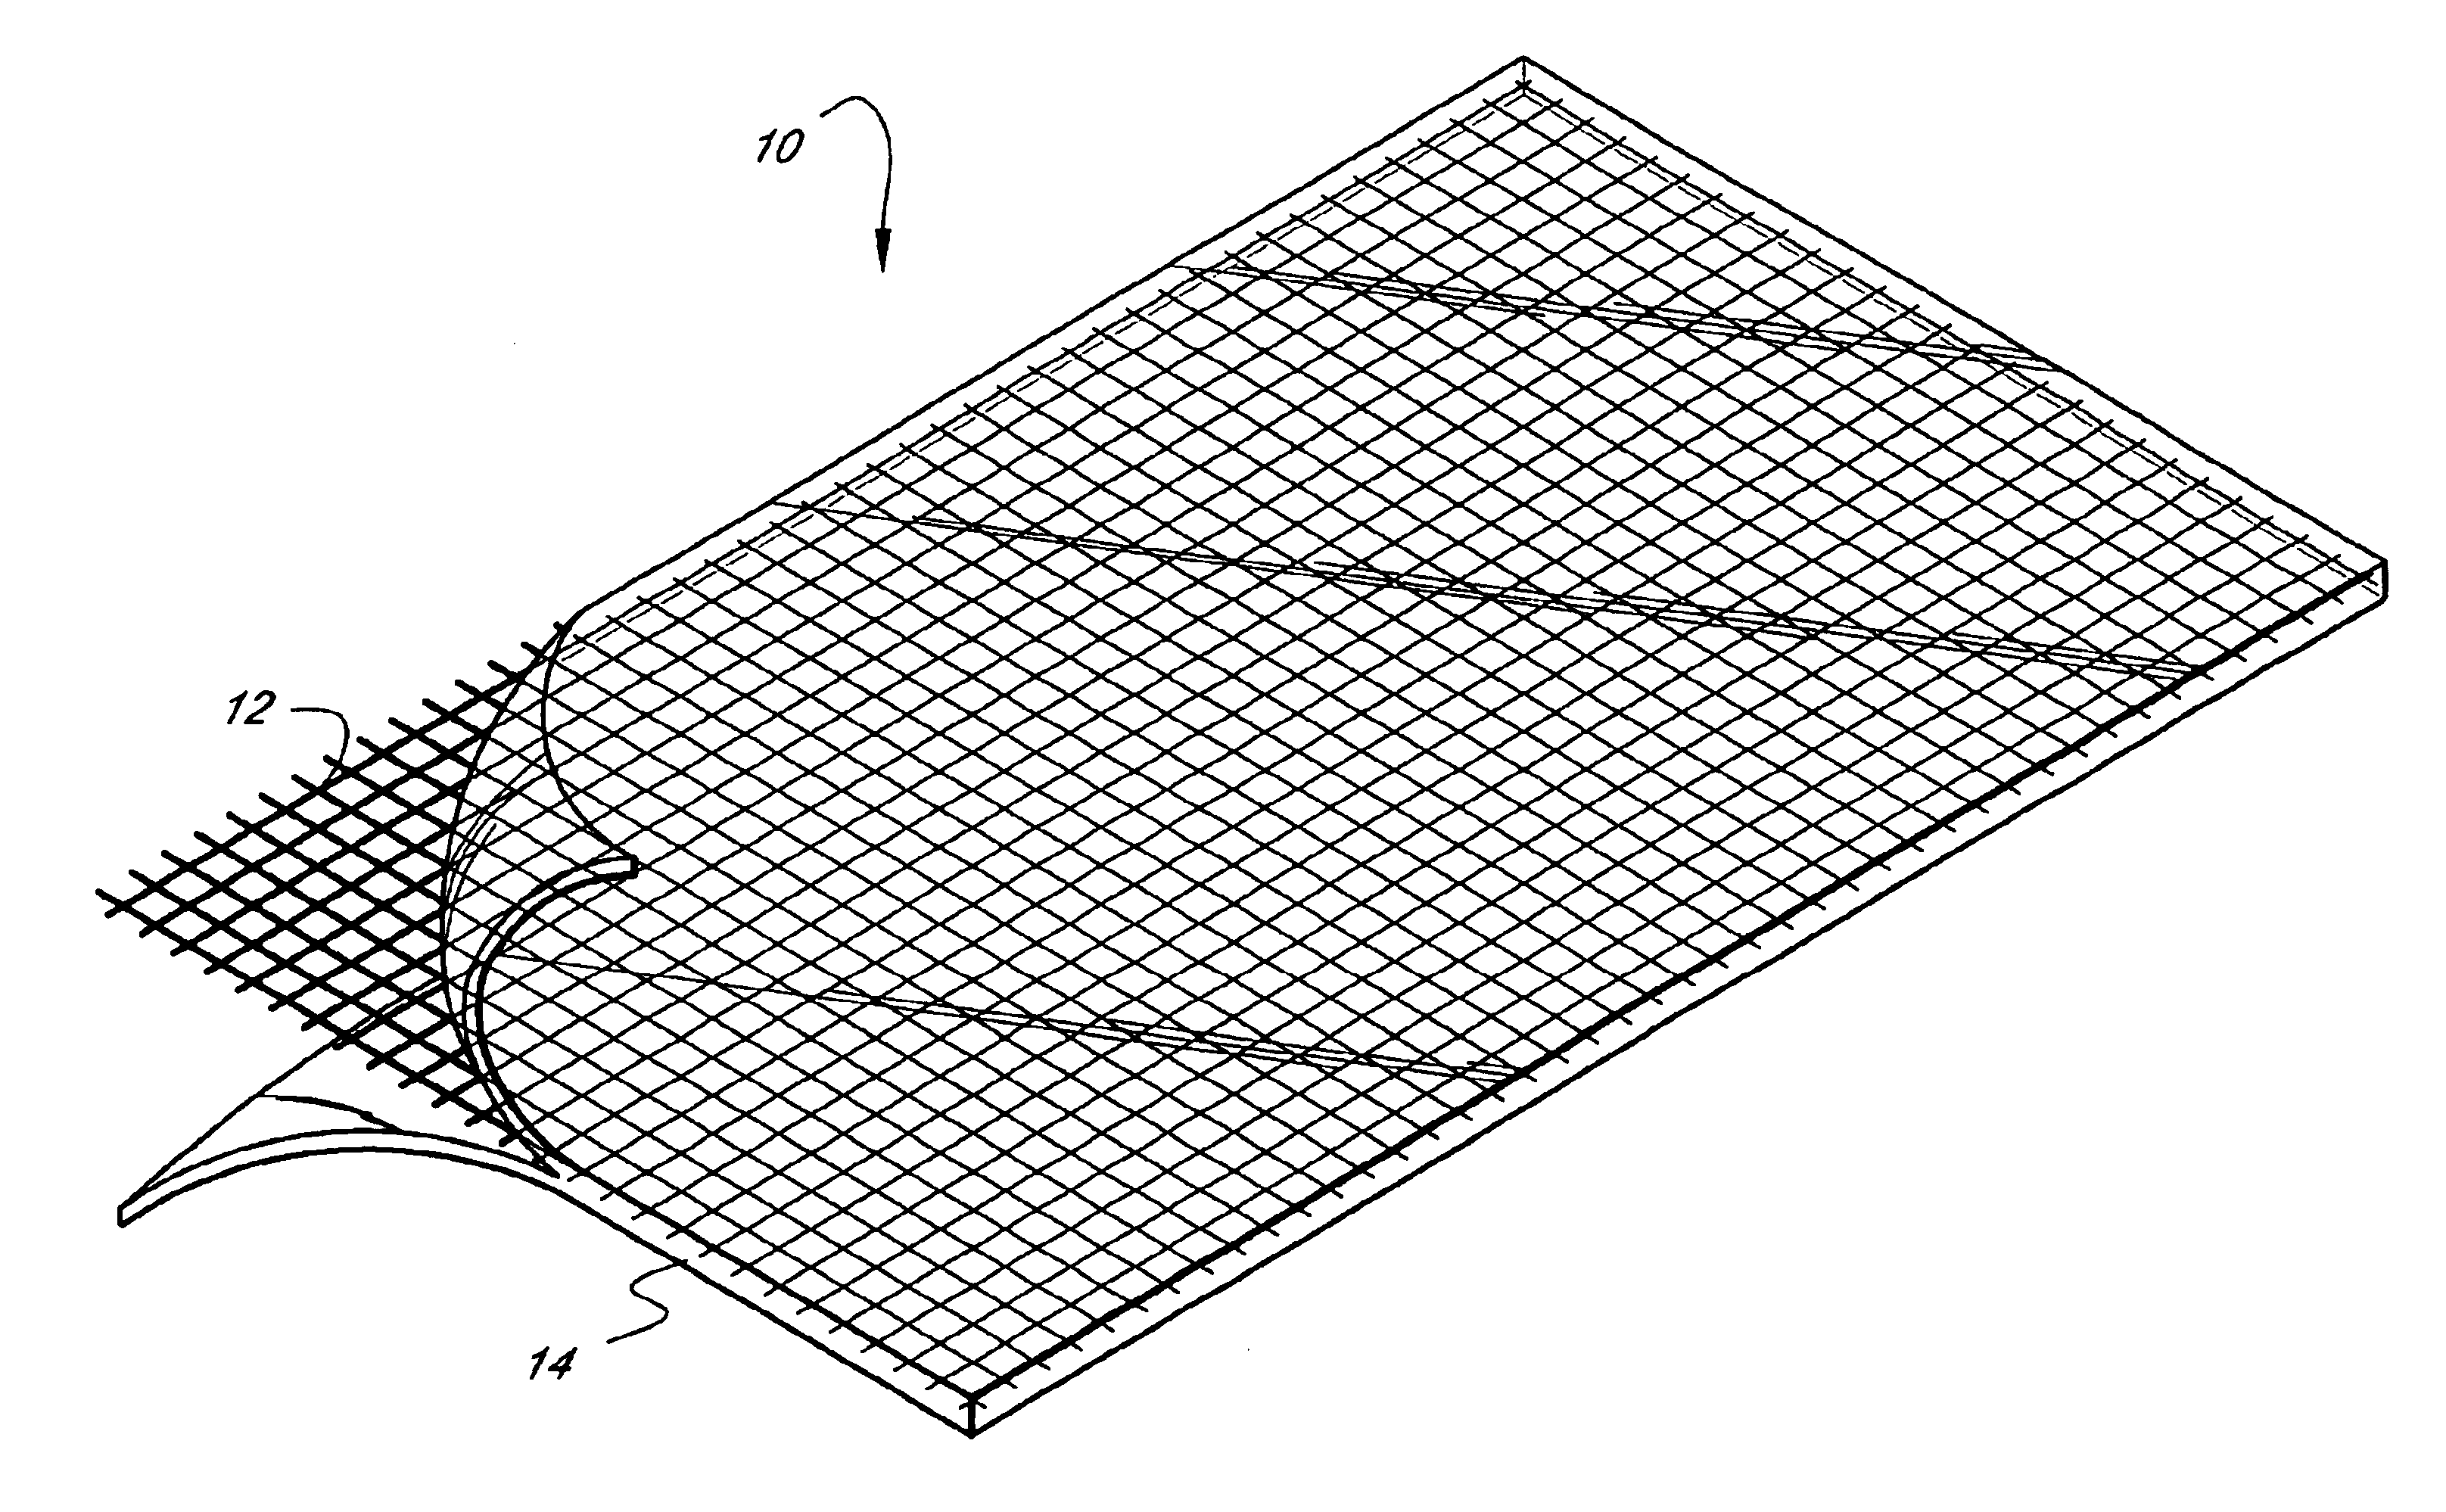 Self-supporting, shaped, three-dimensional biopolymeric materials and methods